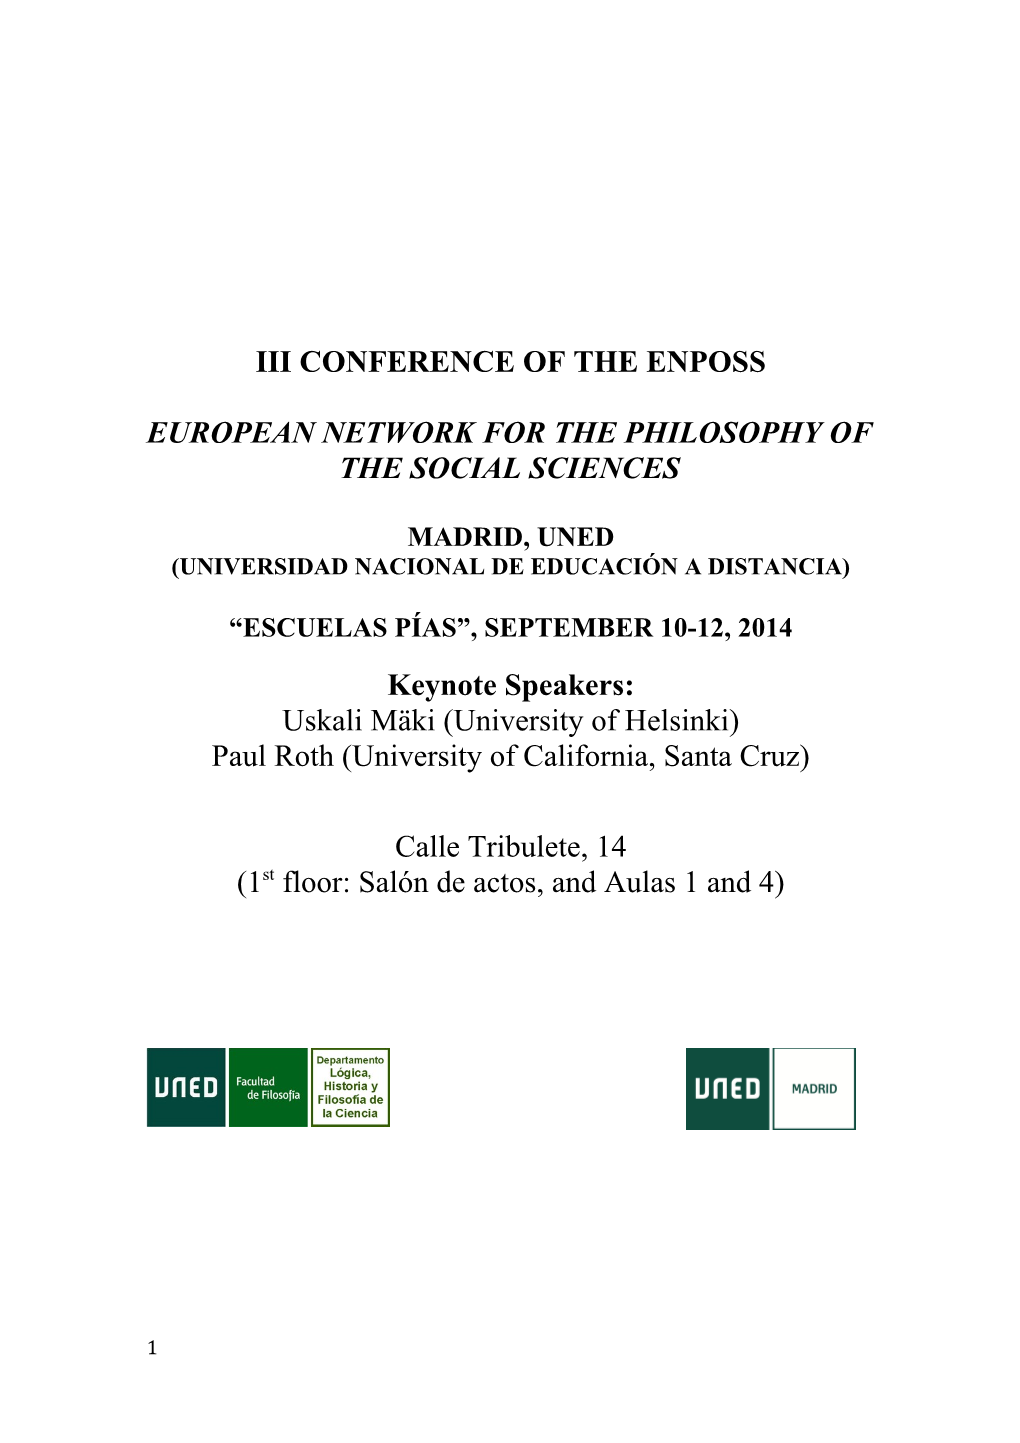 European Network for the Philosophy of the Social Sciences